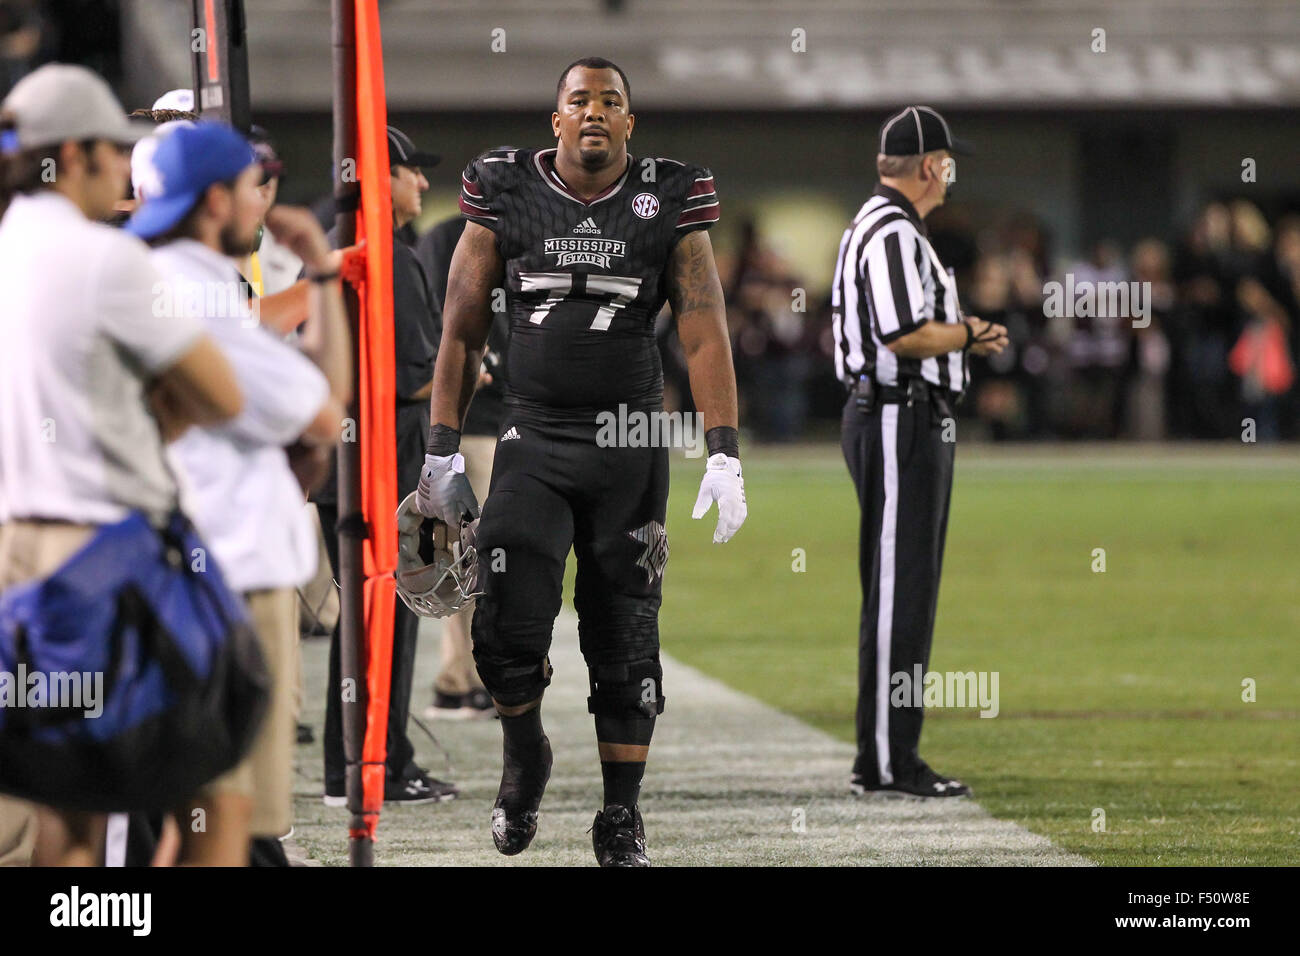 Starkville, MS, USA. 24th Oct, 2015. Mississippi State Bulldogs offensive lineman Rufus Warren (77) was the sidelines during the NCAA Football game between the Mississippi State Bulldogs and the Kentucky Wildcats at Davis Wade Stadium in Starkville, MS. Chuck Lick/CSM/Alamy Live News Stock Photo